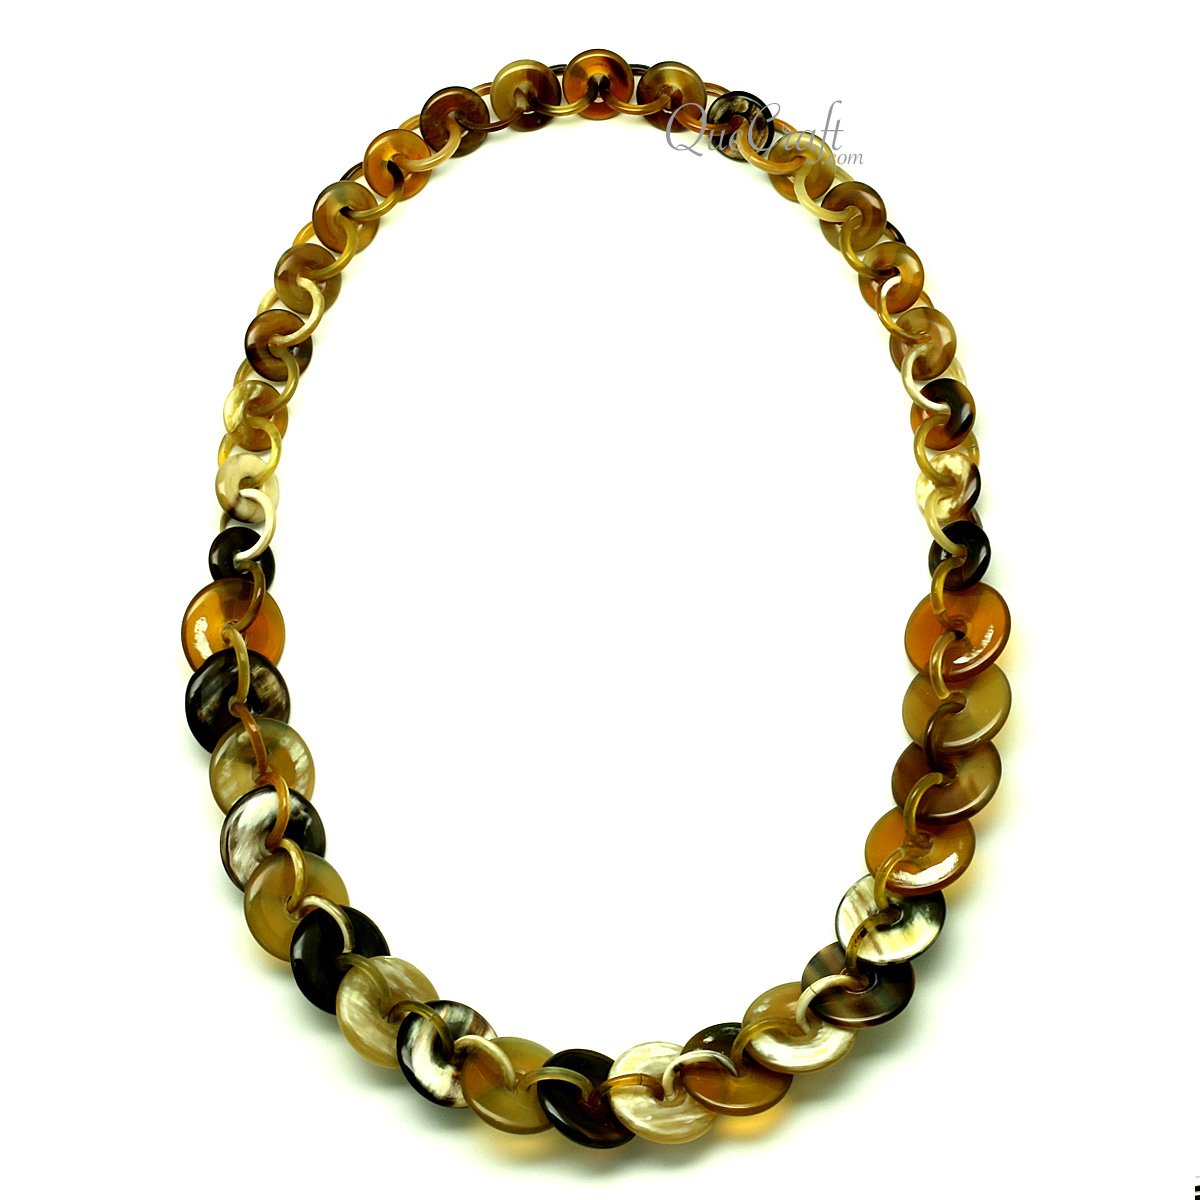 Horn Chain Necklace #12974 - HORN JEWELRY